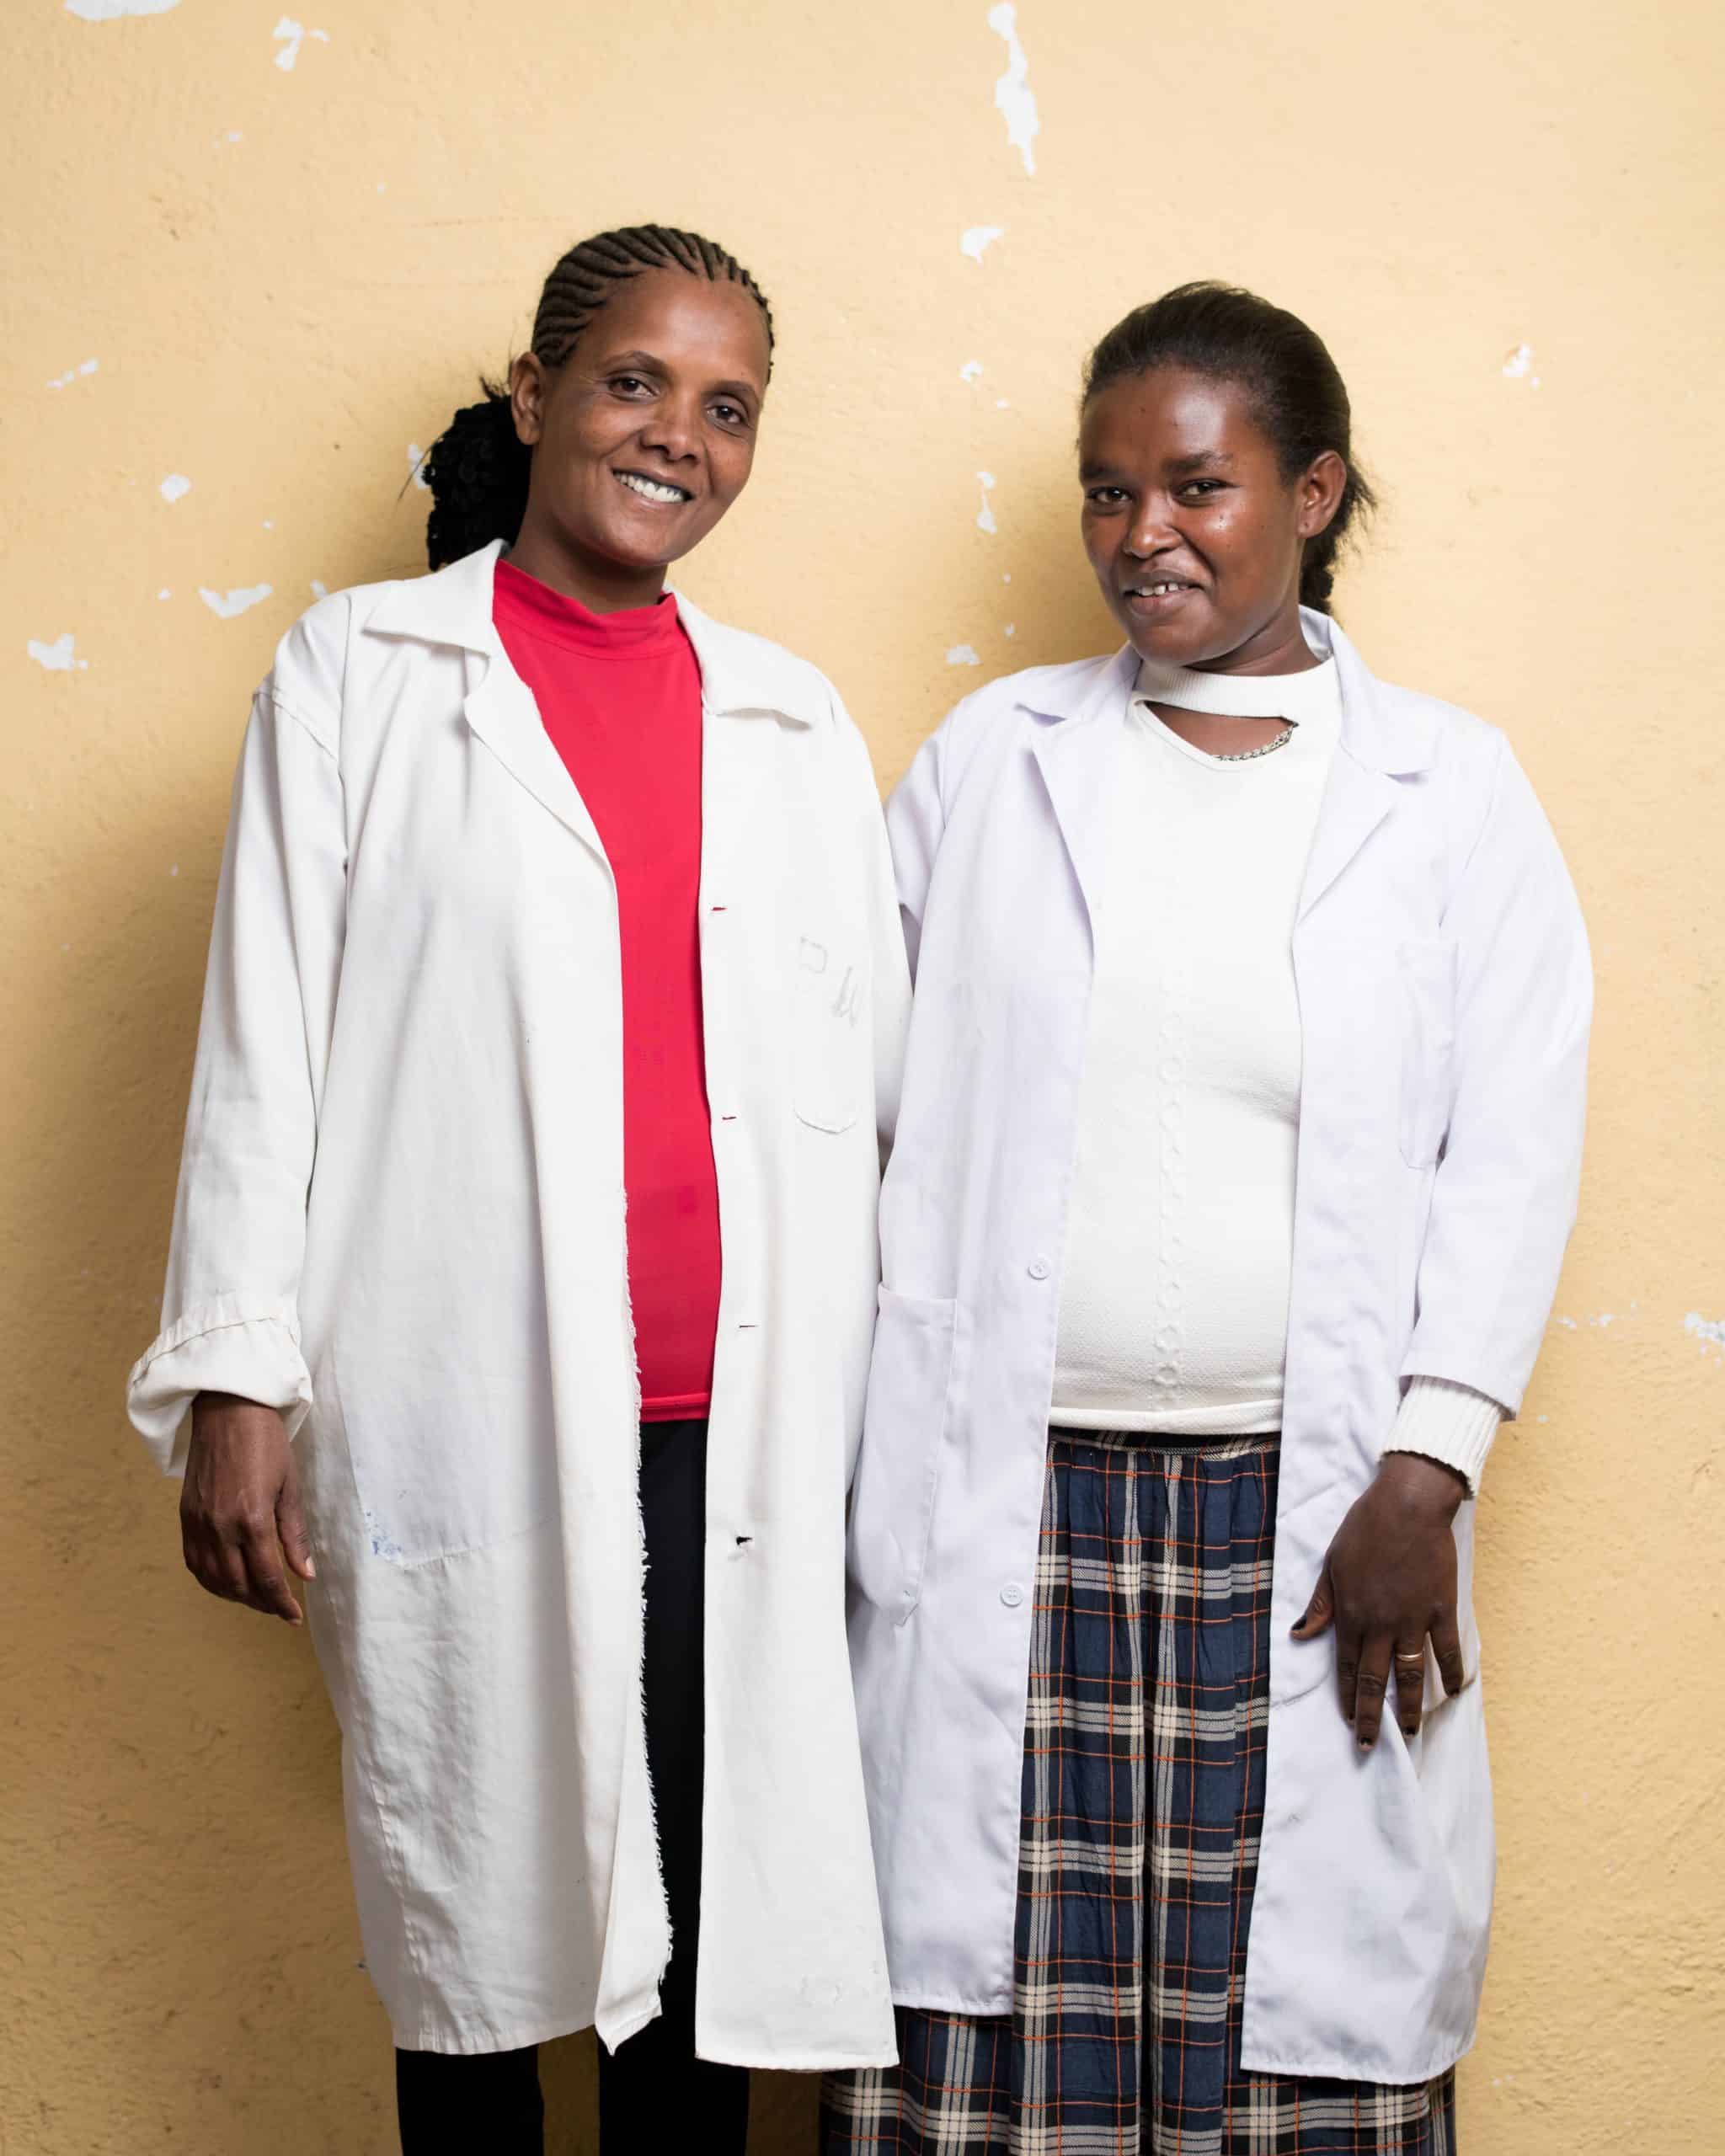 Health Extension Workers (HEW) Asefu Gebre-Selassie (in red top) and Abeba Abreham (in white top) at Hagre Selam Health Post in Hintalo Wojerat woreda of the South East Zone of Tigray Region, Ethiopia.